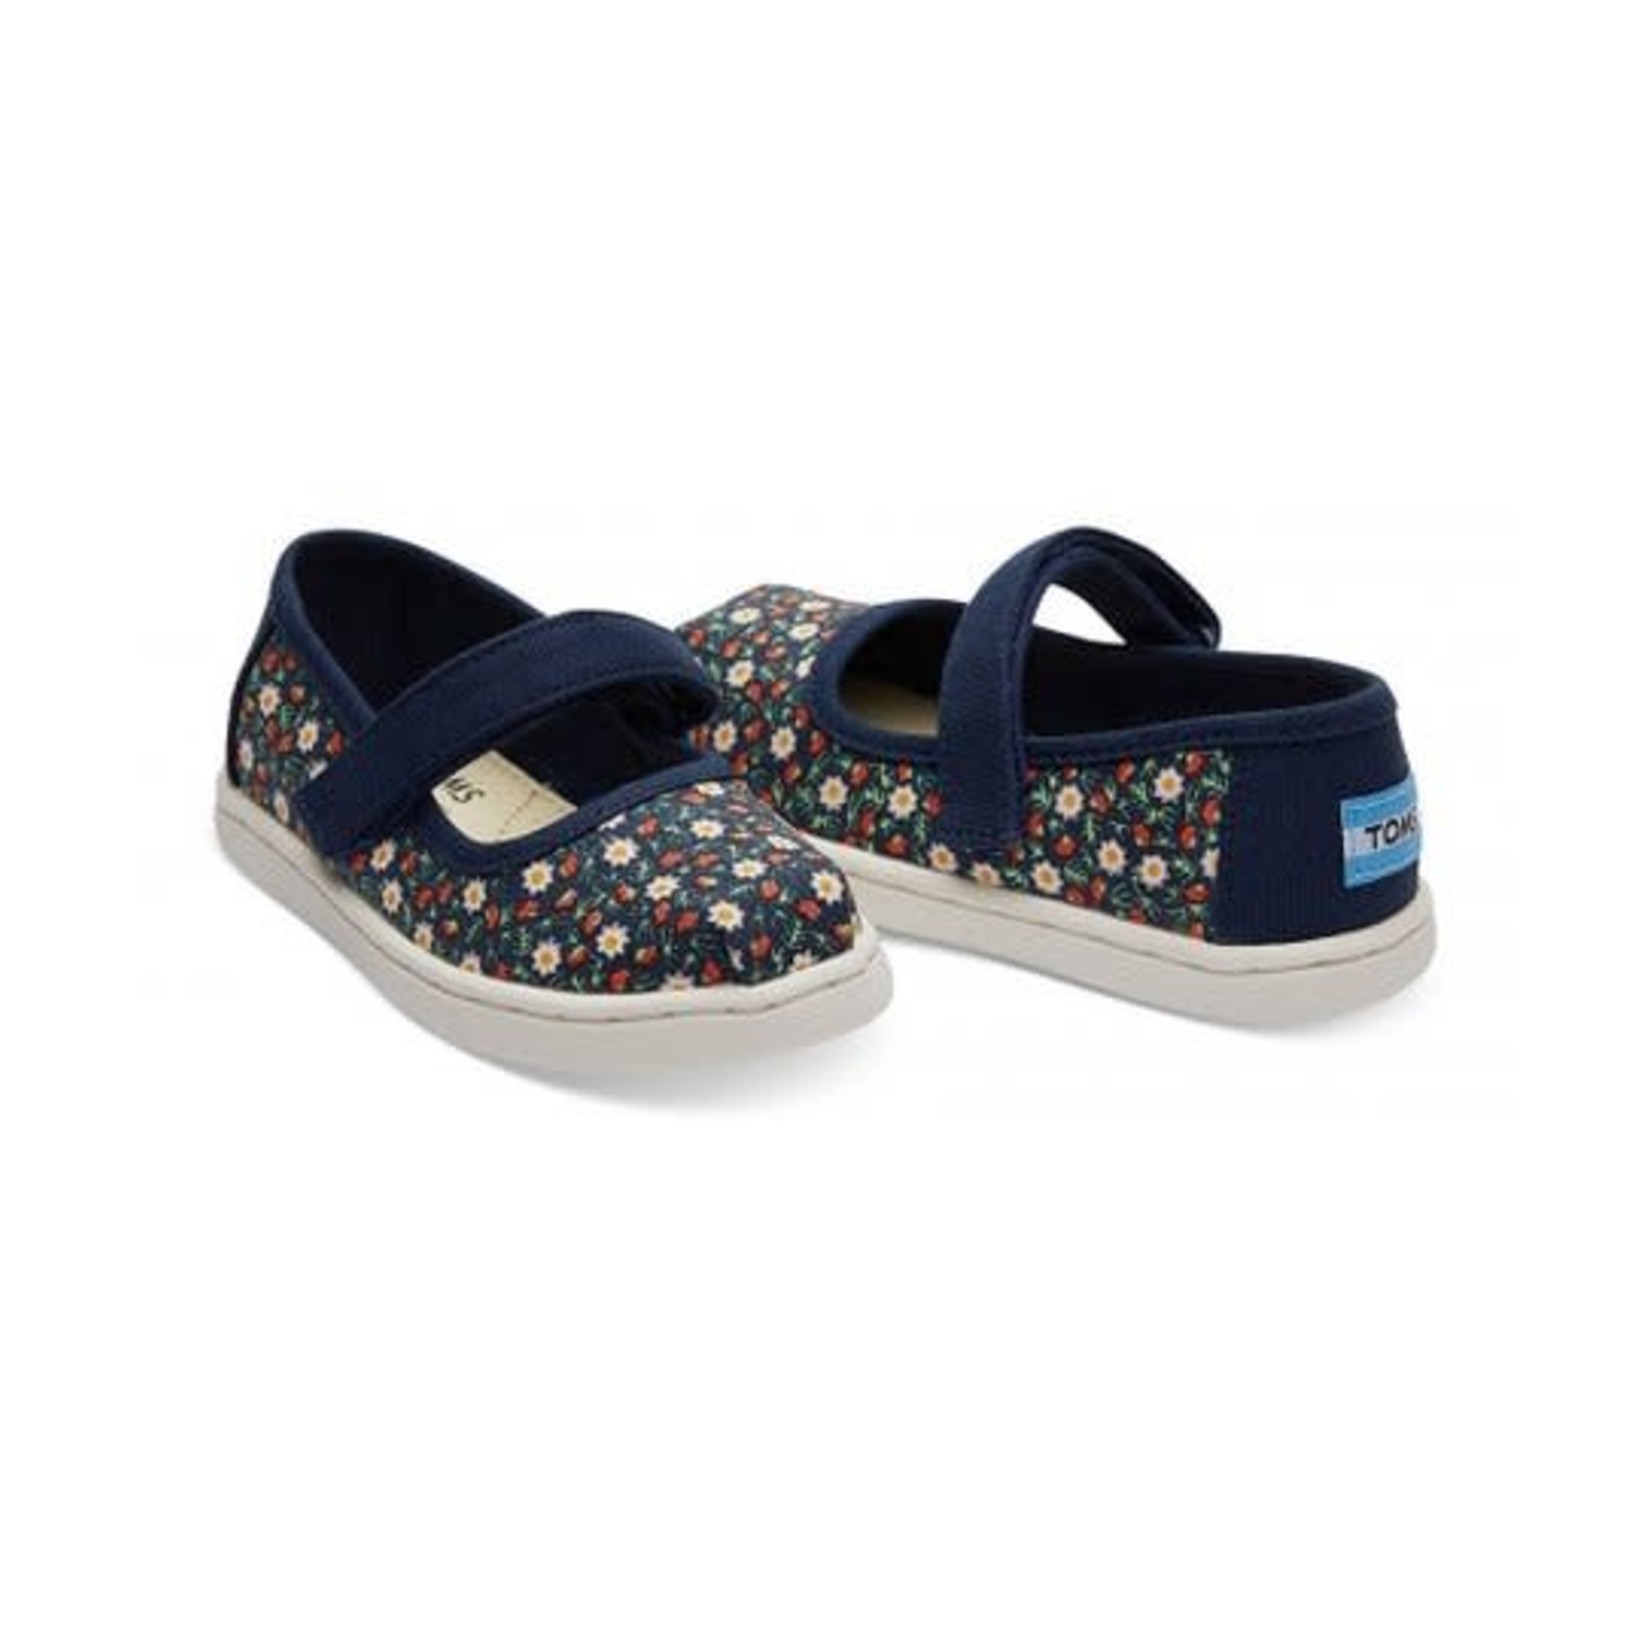 Toms TOMS - Chaussures en toile 'Mary Jane' - Navy Local Floral Print